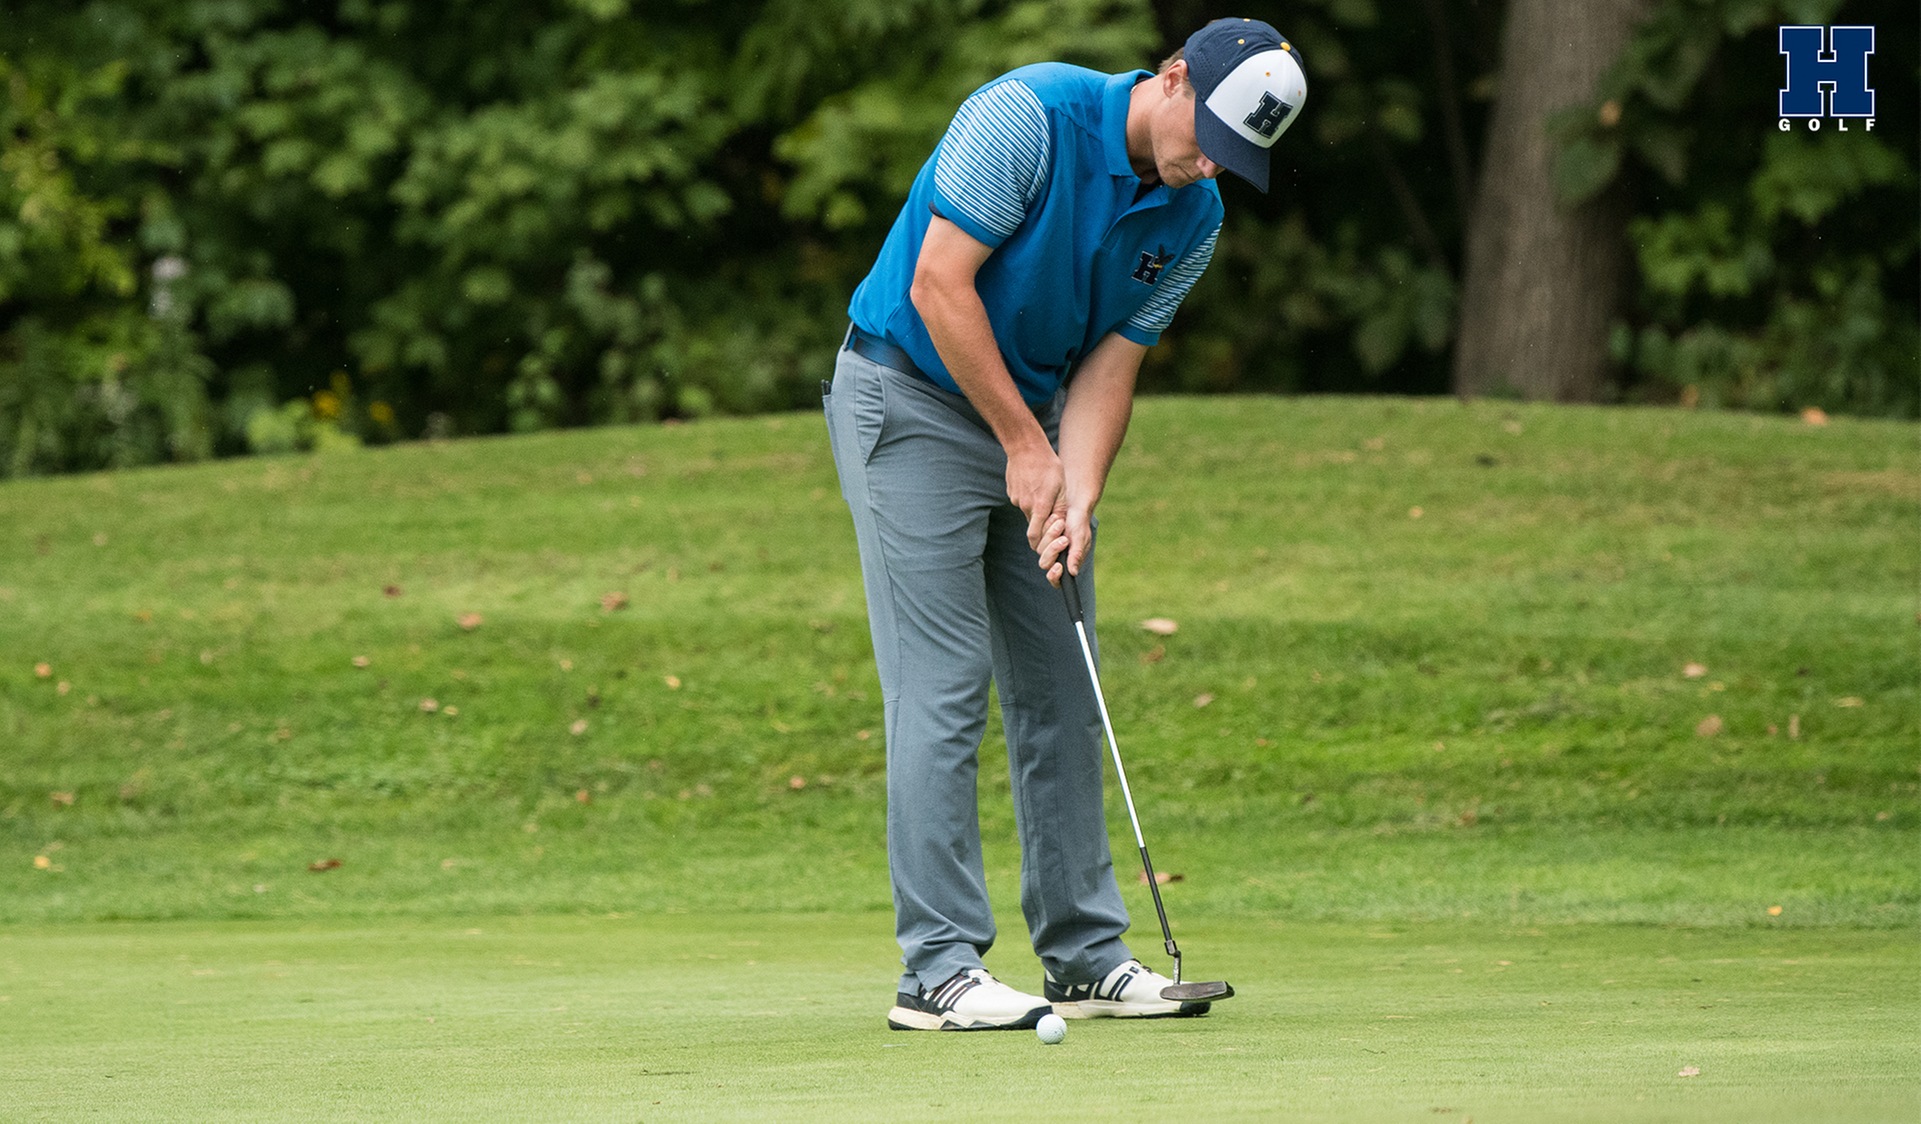 Morton Claims Individual Crown, Humber 2 Finishes Second